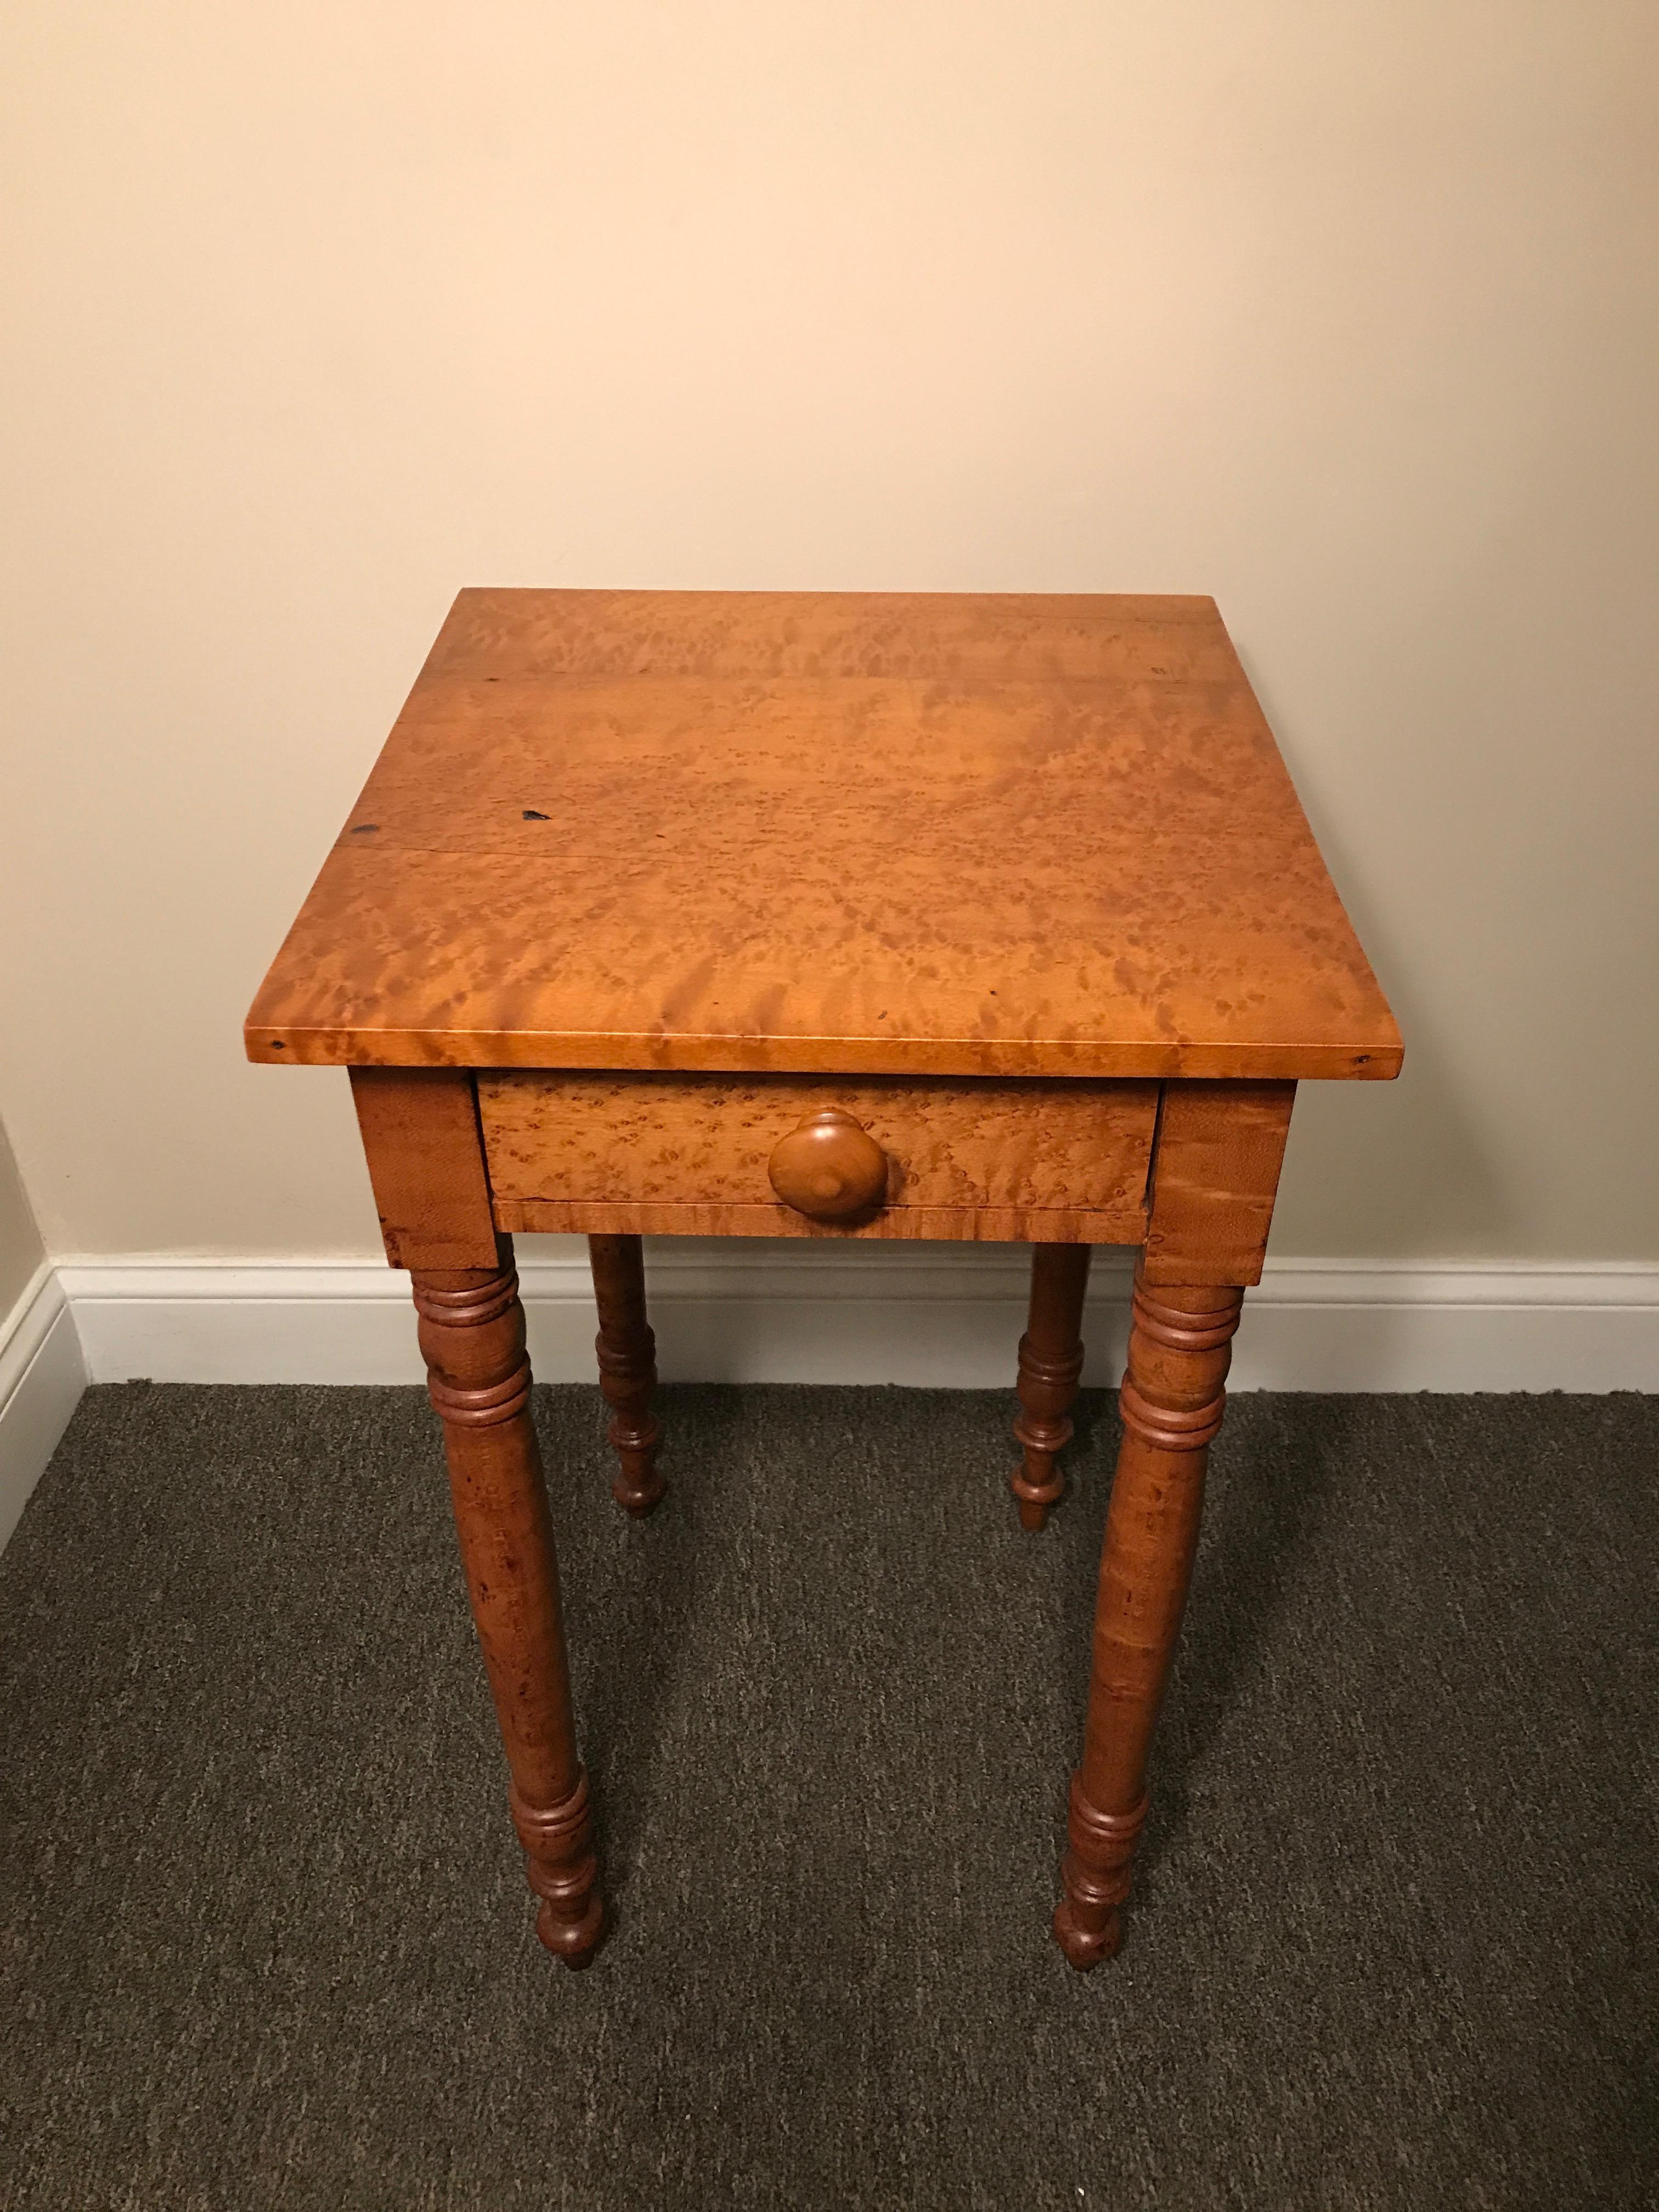 Sheraton one drawer stand in highly figured bird's-eye maple, circa 1810, Quincy, Ma. Turned legs, wooden knob, dovetailed drawers. Recent top repair and refinish in our shop. Base was cleaned and polished. A fine example of a Sheraton stand.